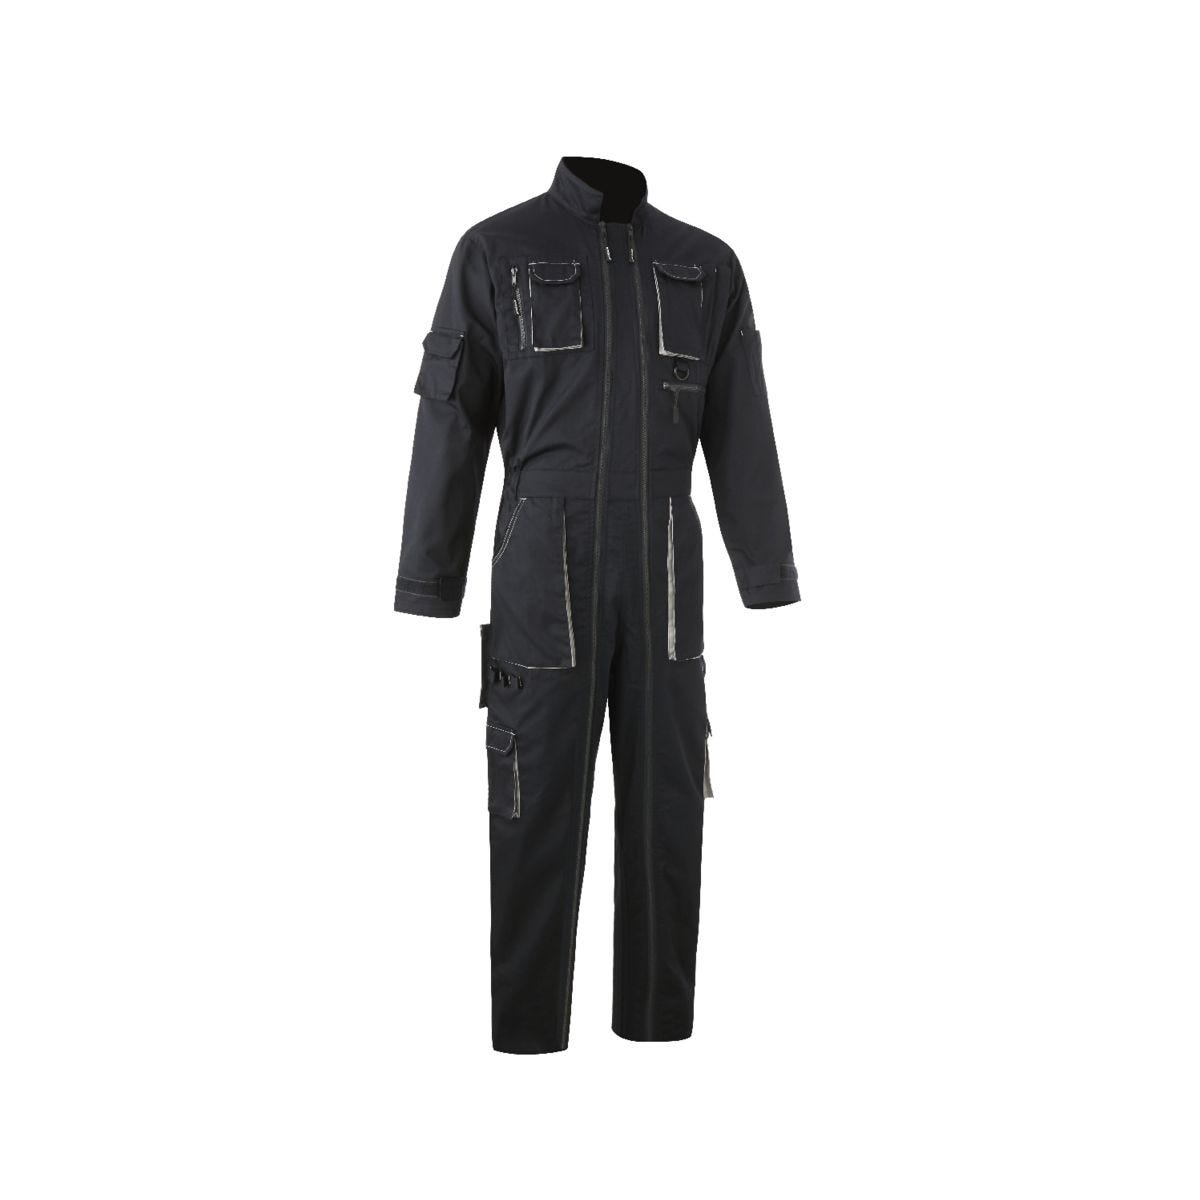 NAVY II Combinaison 2 zips, marine/gris, 60%CO/40%PES, 245g/m² - COVERGUARD - Taille S 0